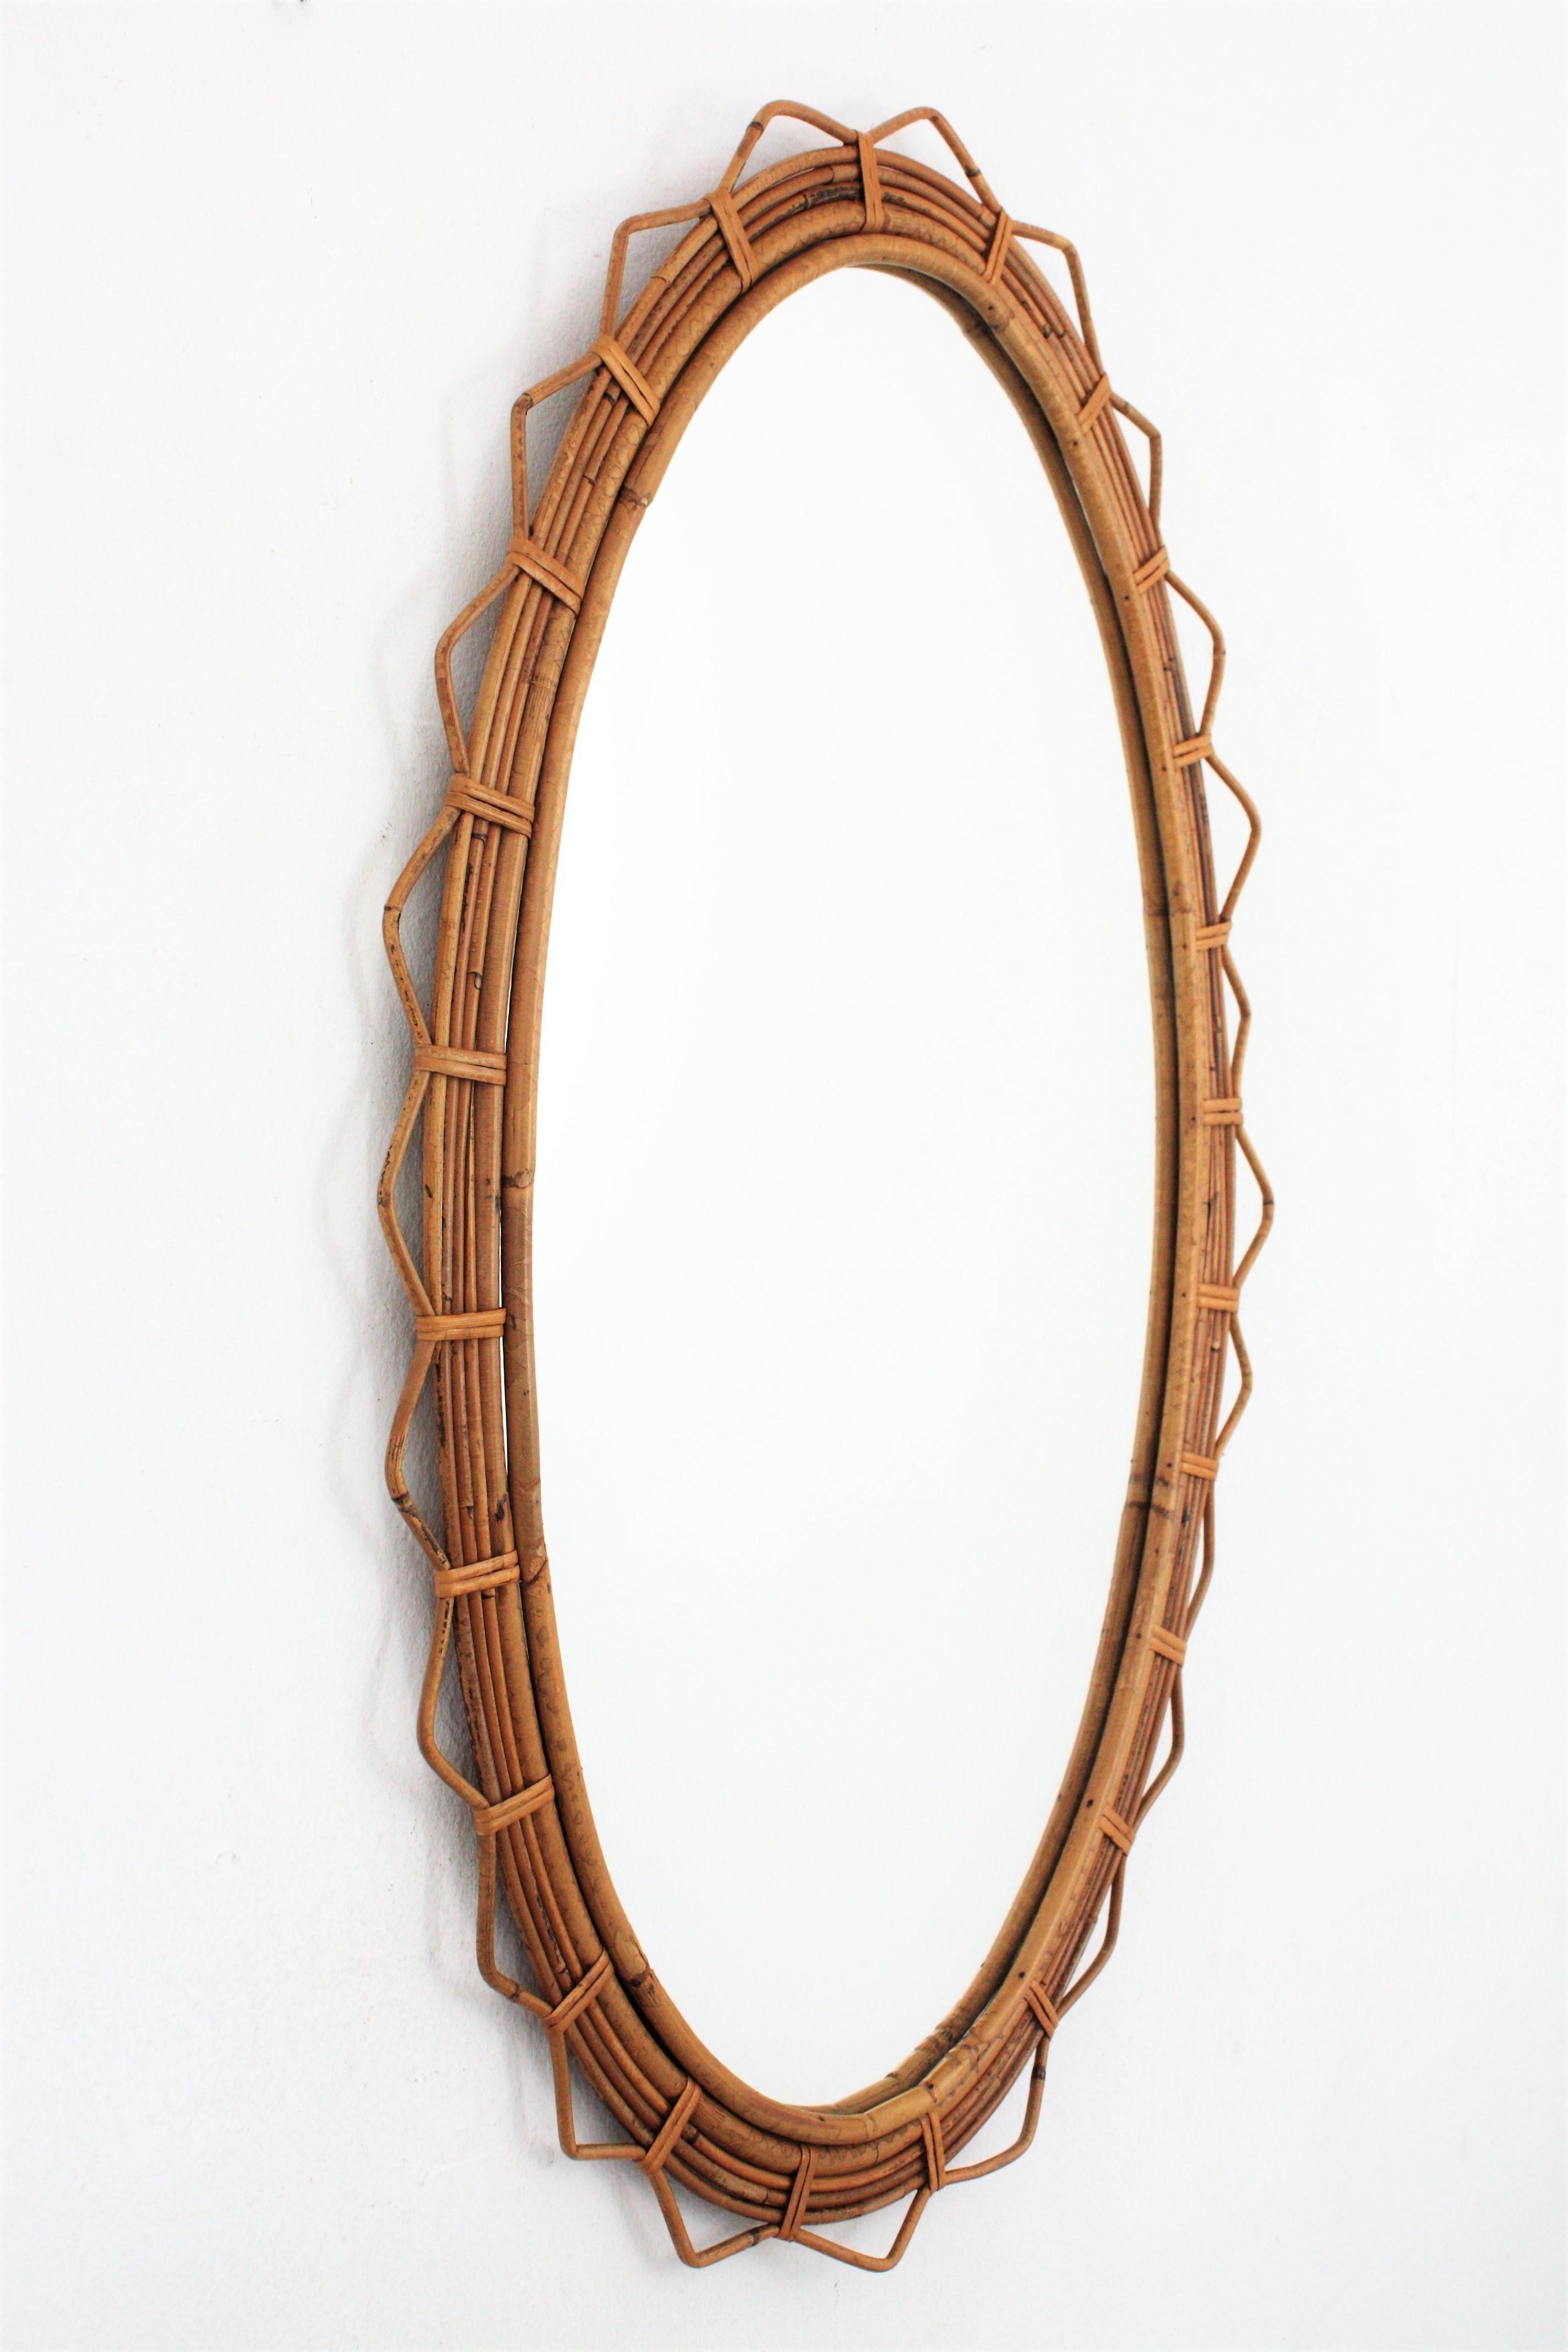 Hand-Crafted Large 1950s French Riviera Bamboo and Rattan Jagged Edge Oval Sunburst Mirror